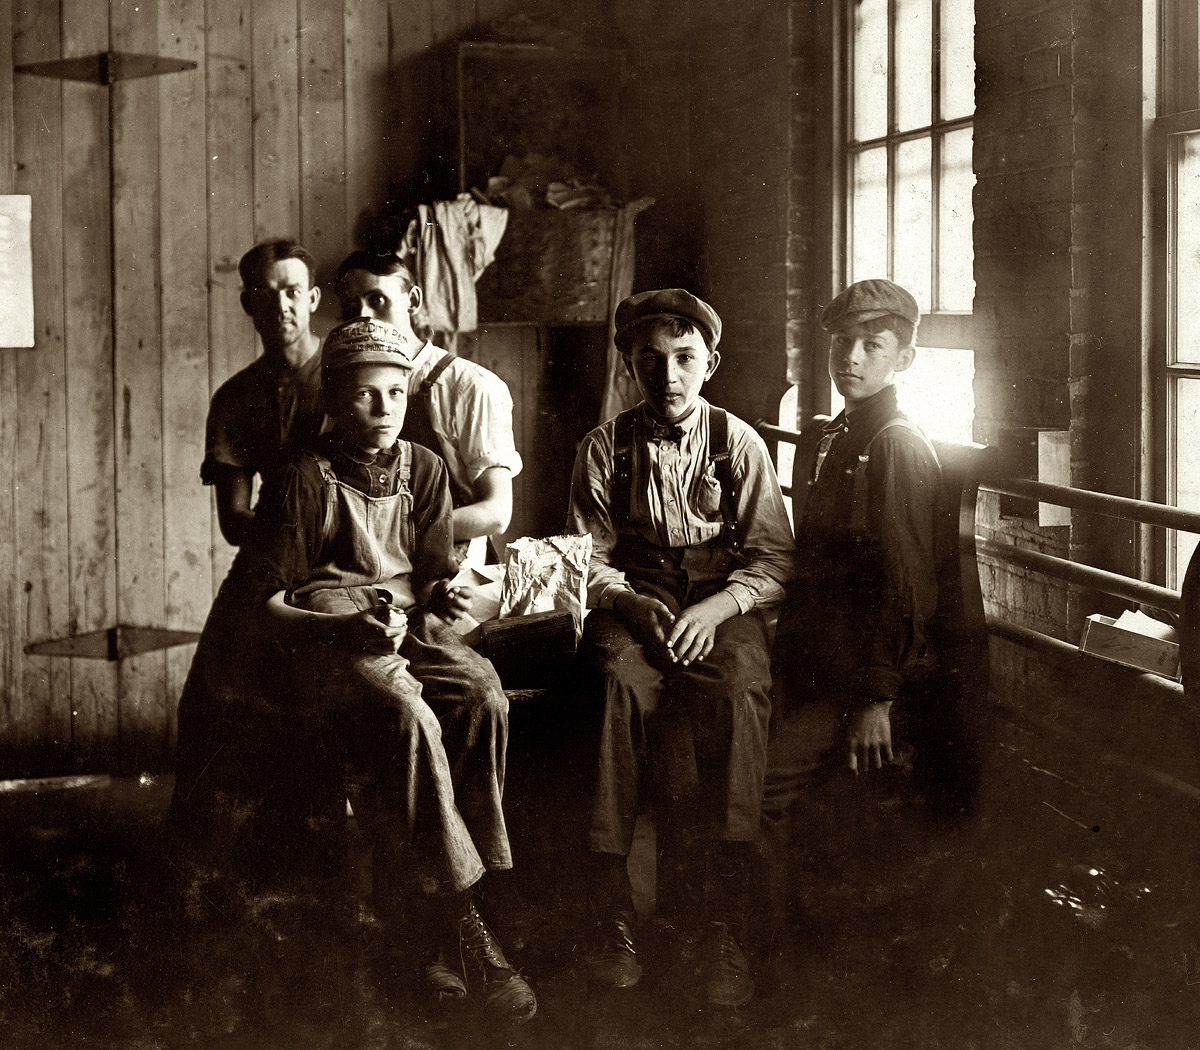 August 1908. "Noon hour in an Indianapolis furniture factory. Witness, E.N. Clopper." View full size. Photo and caption by Lewis Wickes Hine.